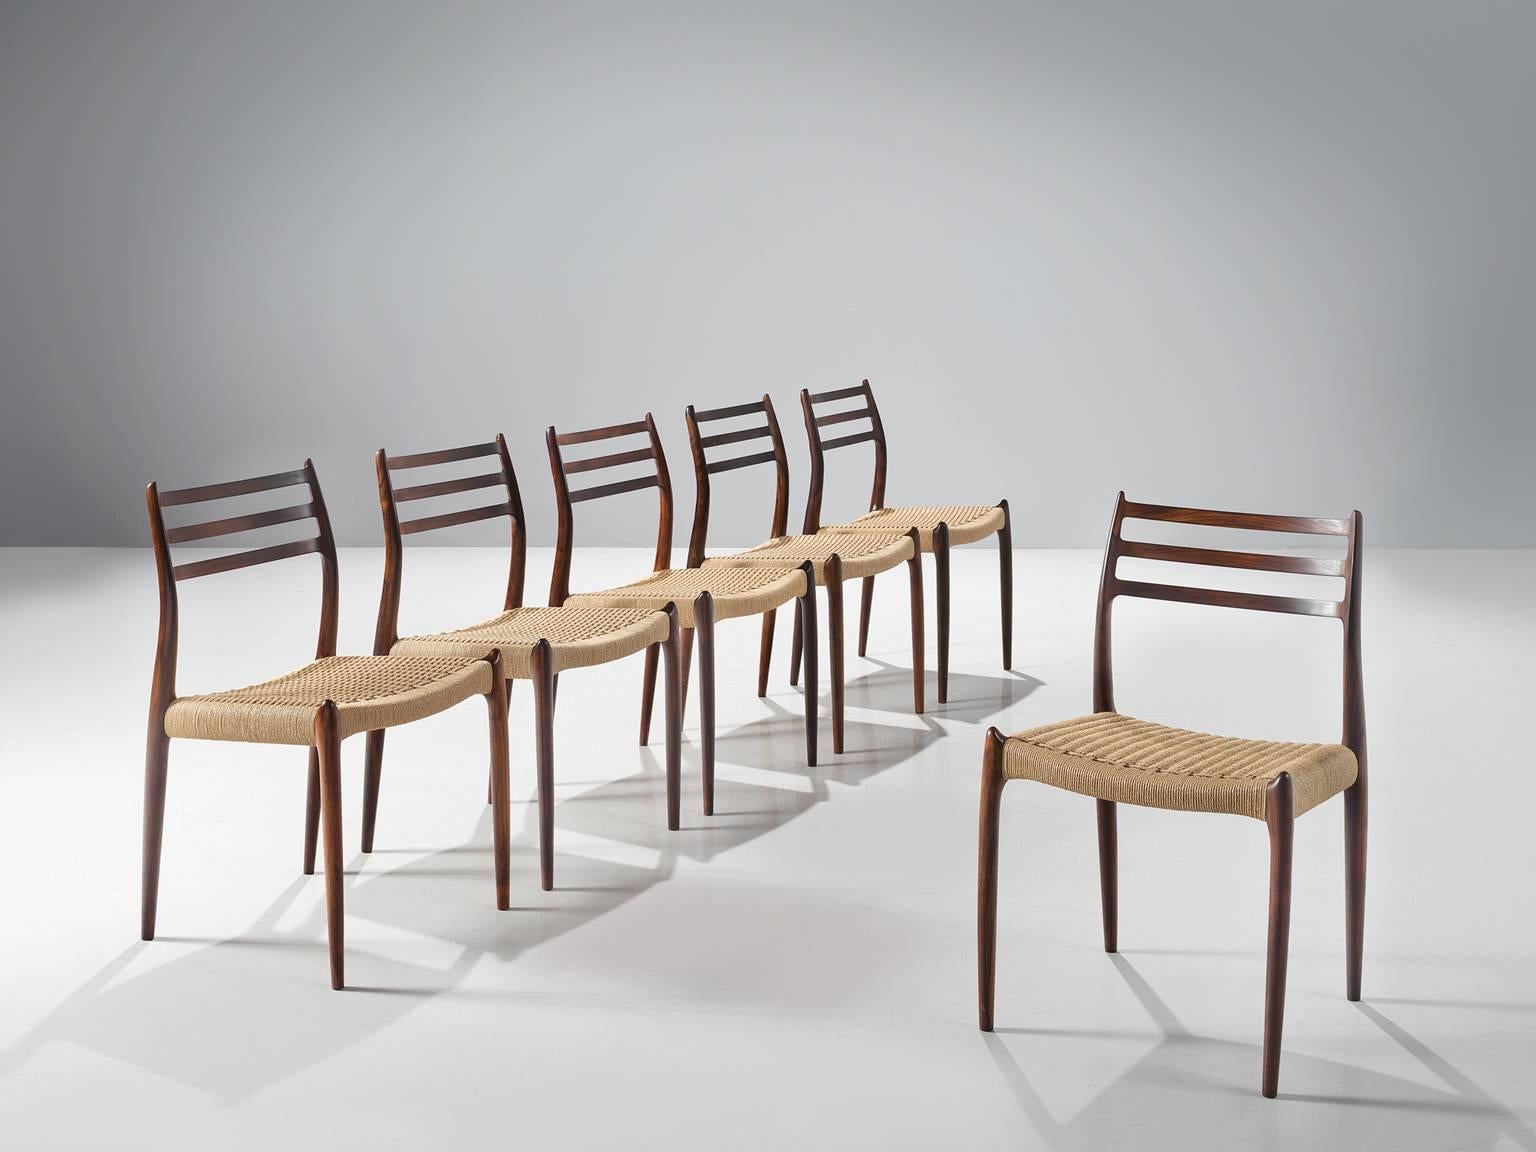 Niels Otto Möller for J.L. Møllers Møbelfabrik, set of six dining chairs model 85, rosewood and wickered cane, Denmark, 1960s.

These iconic dining chairs by Möller are upholstered with cane by our upholstery studio. The design of model 85 is one